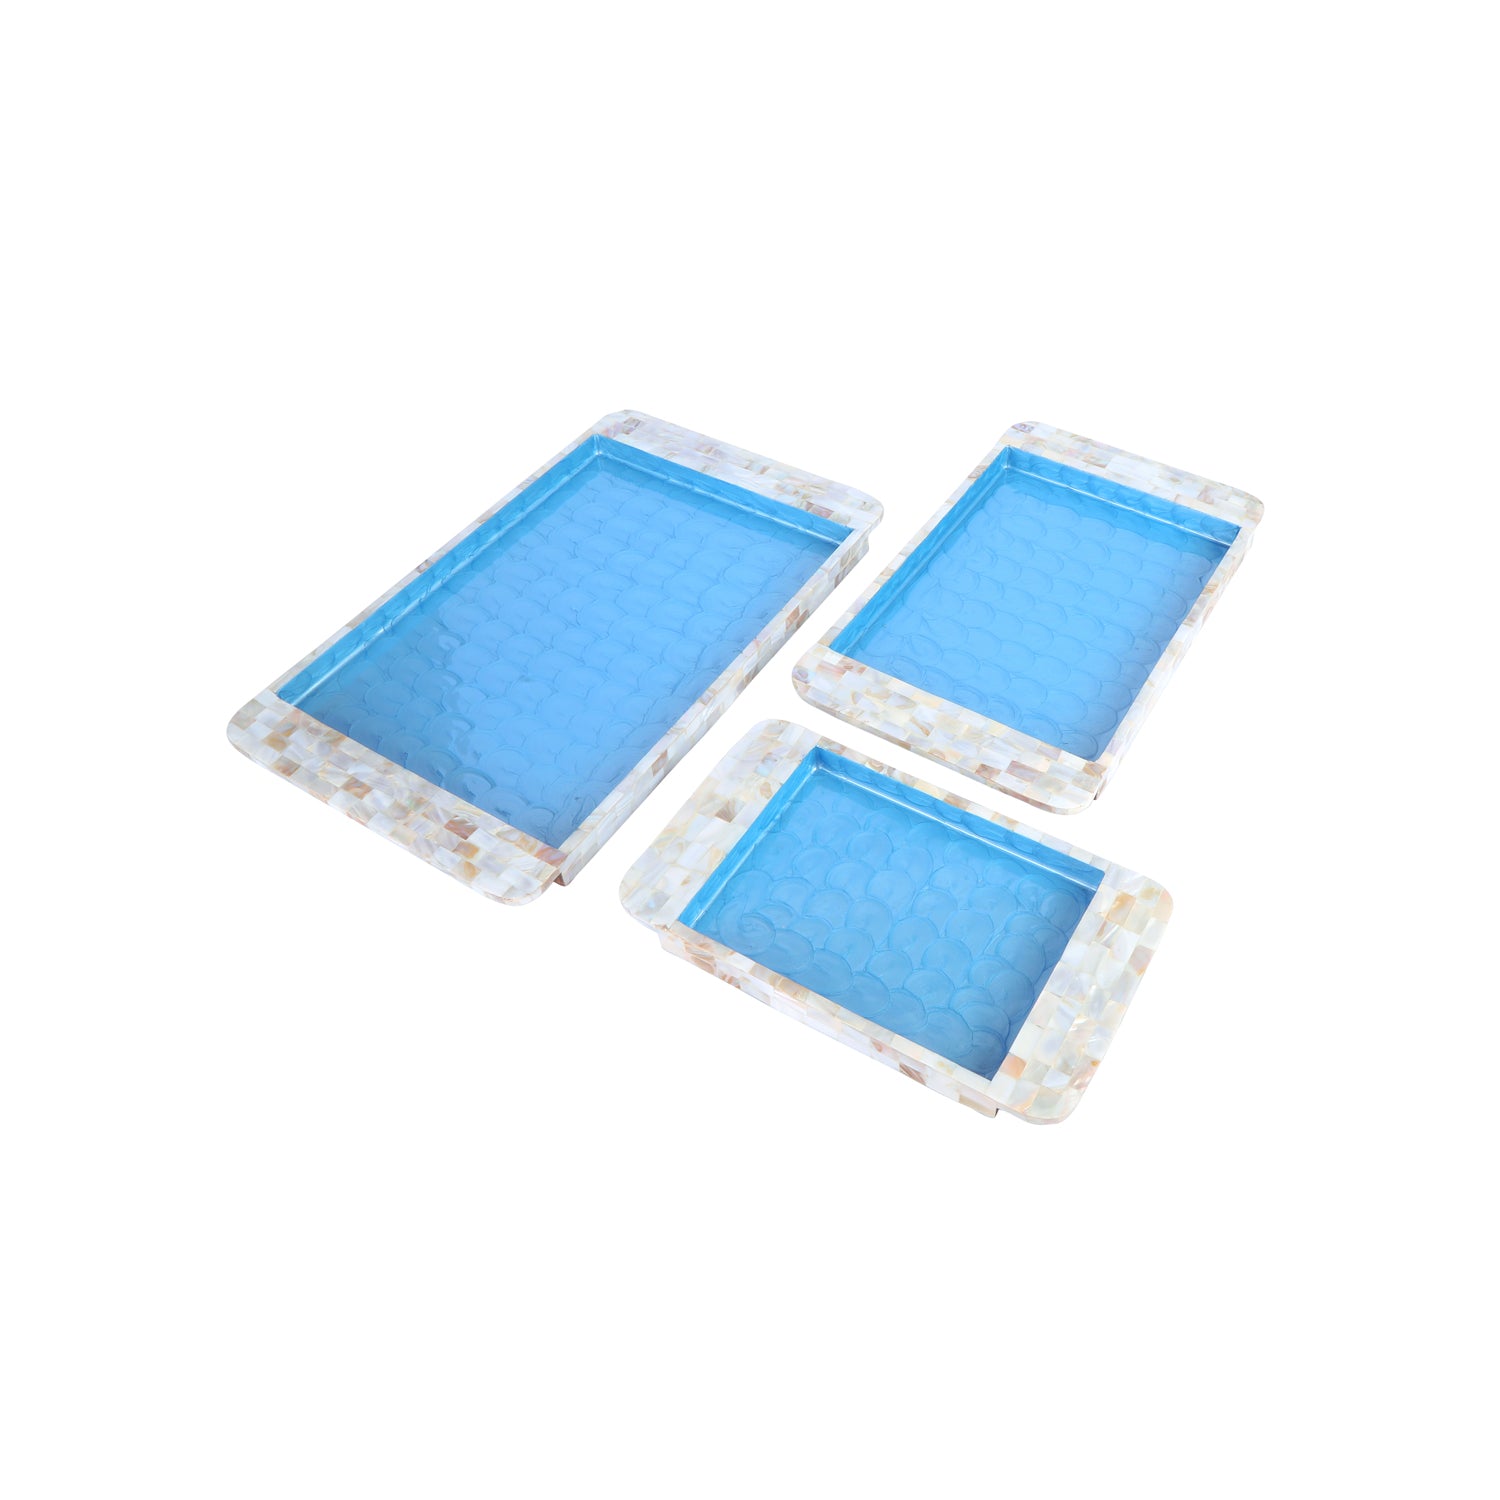 Tray Set Of 3 - Blue Mother Of Pearl